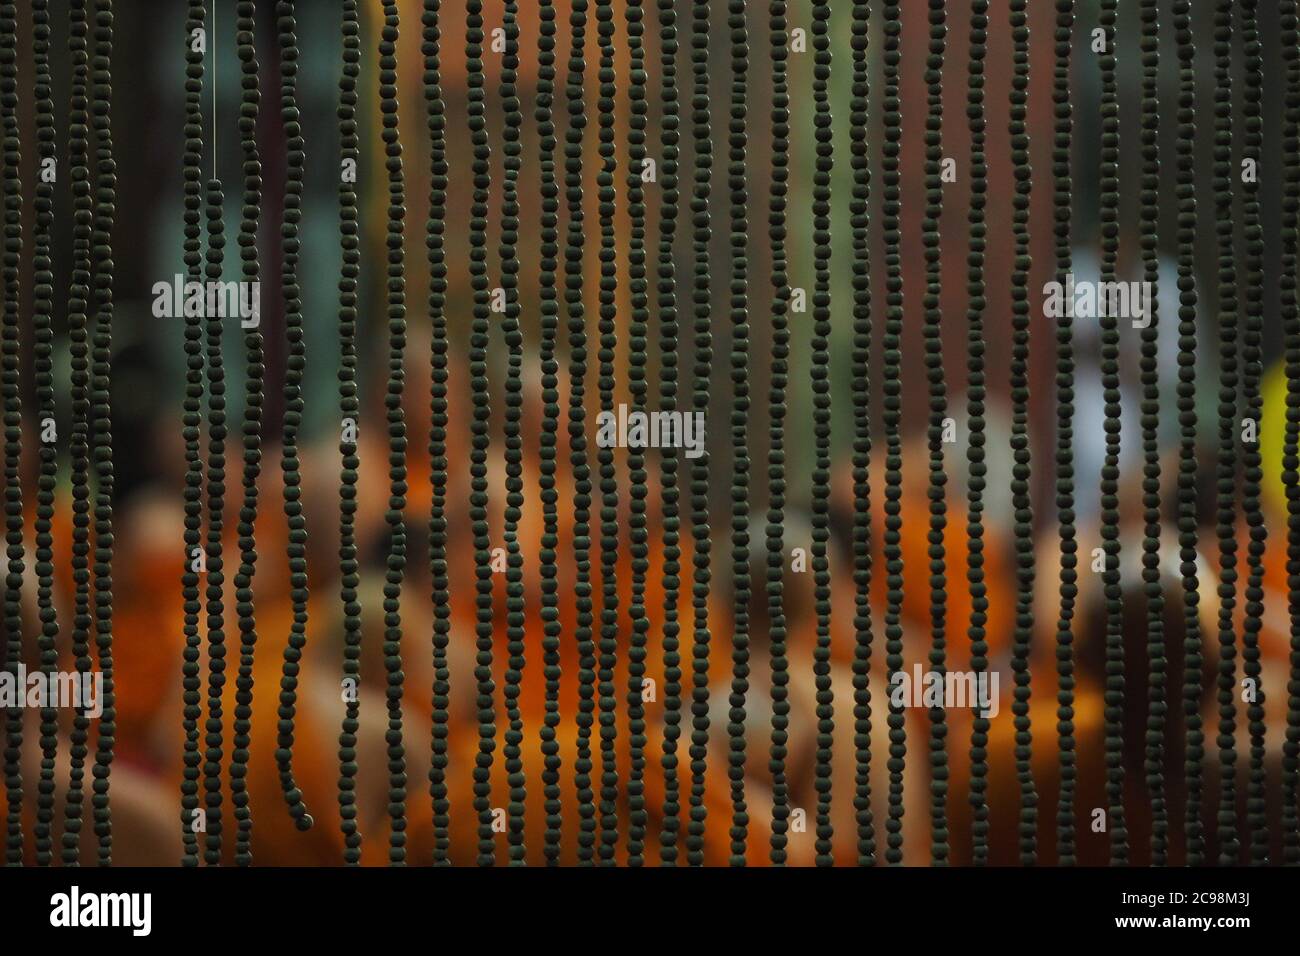 Look at the monks through the blinds in Thailand temple Stock Photo